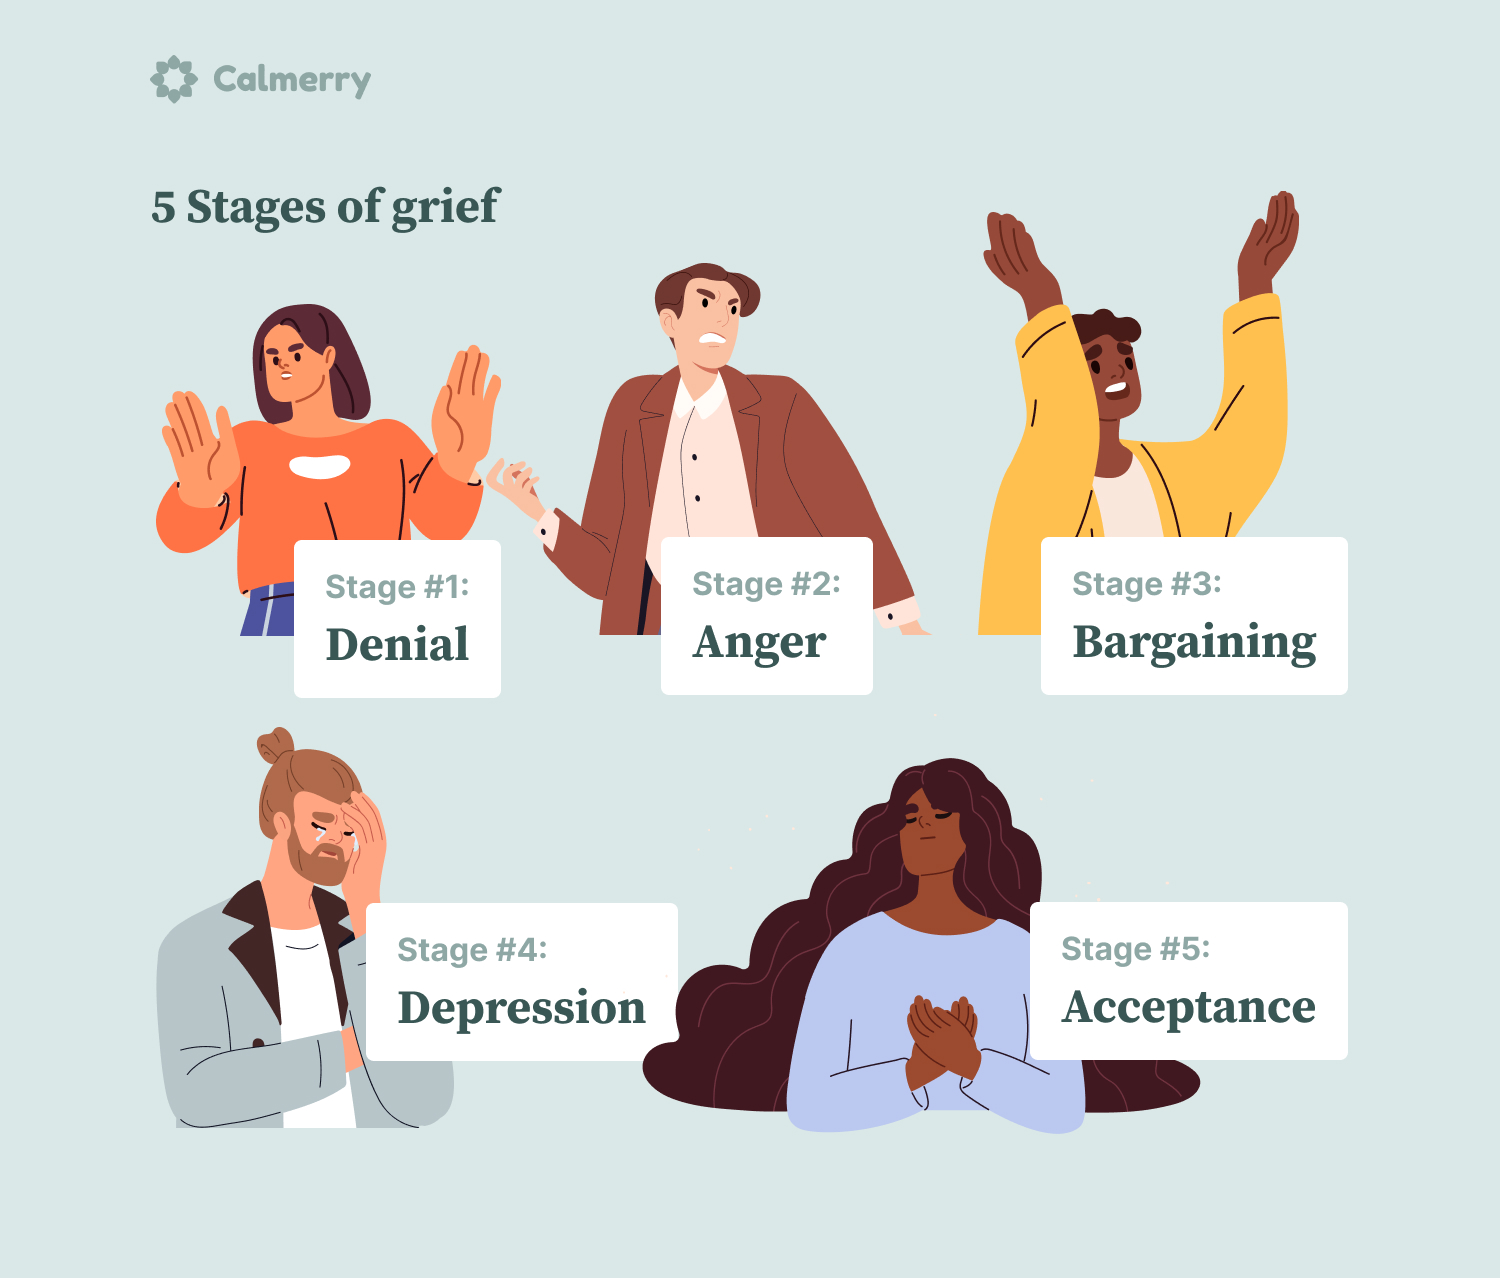 5 stages of grief in order